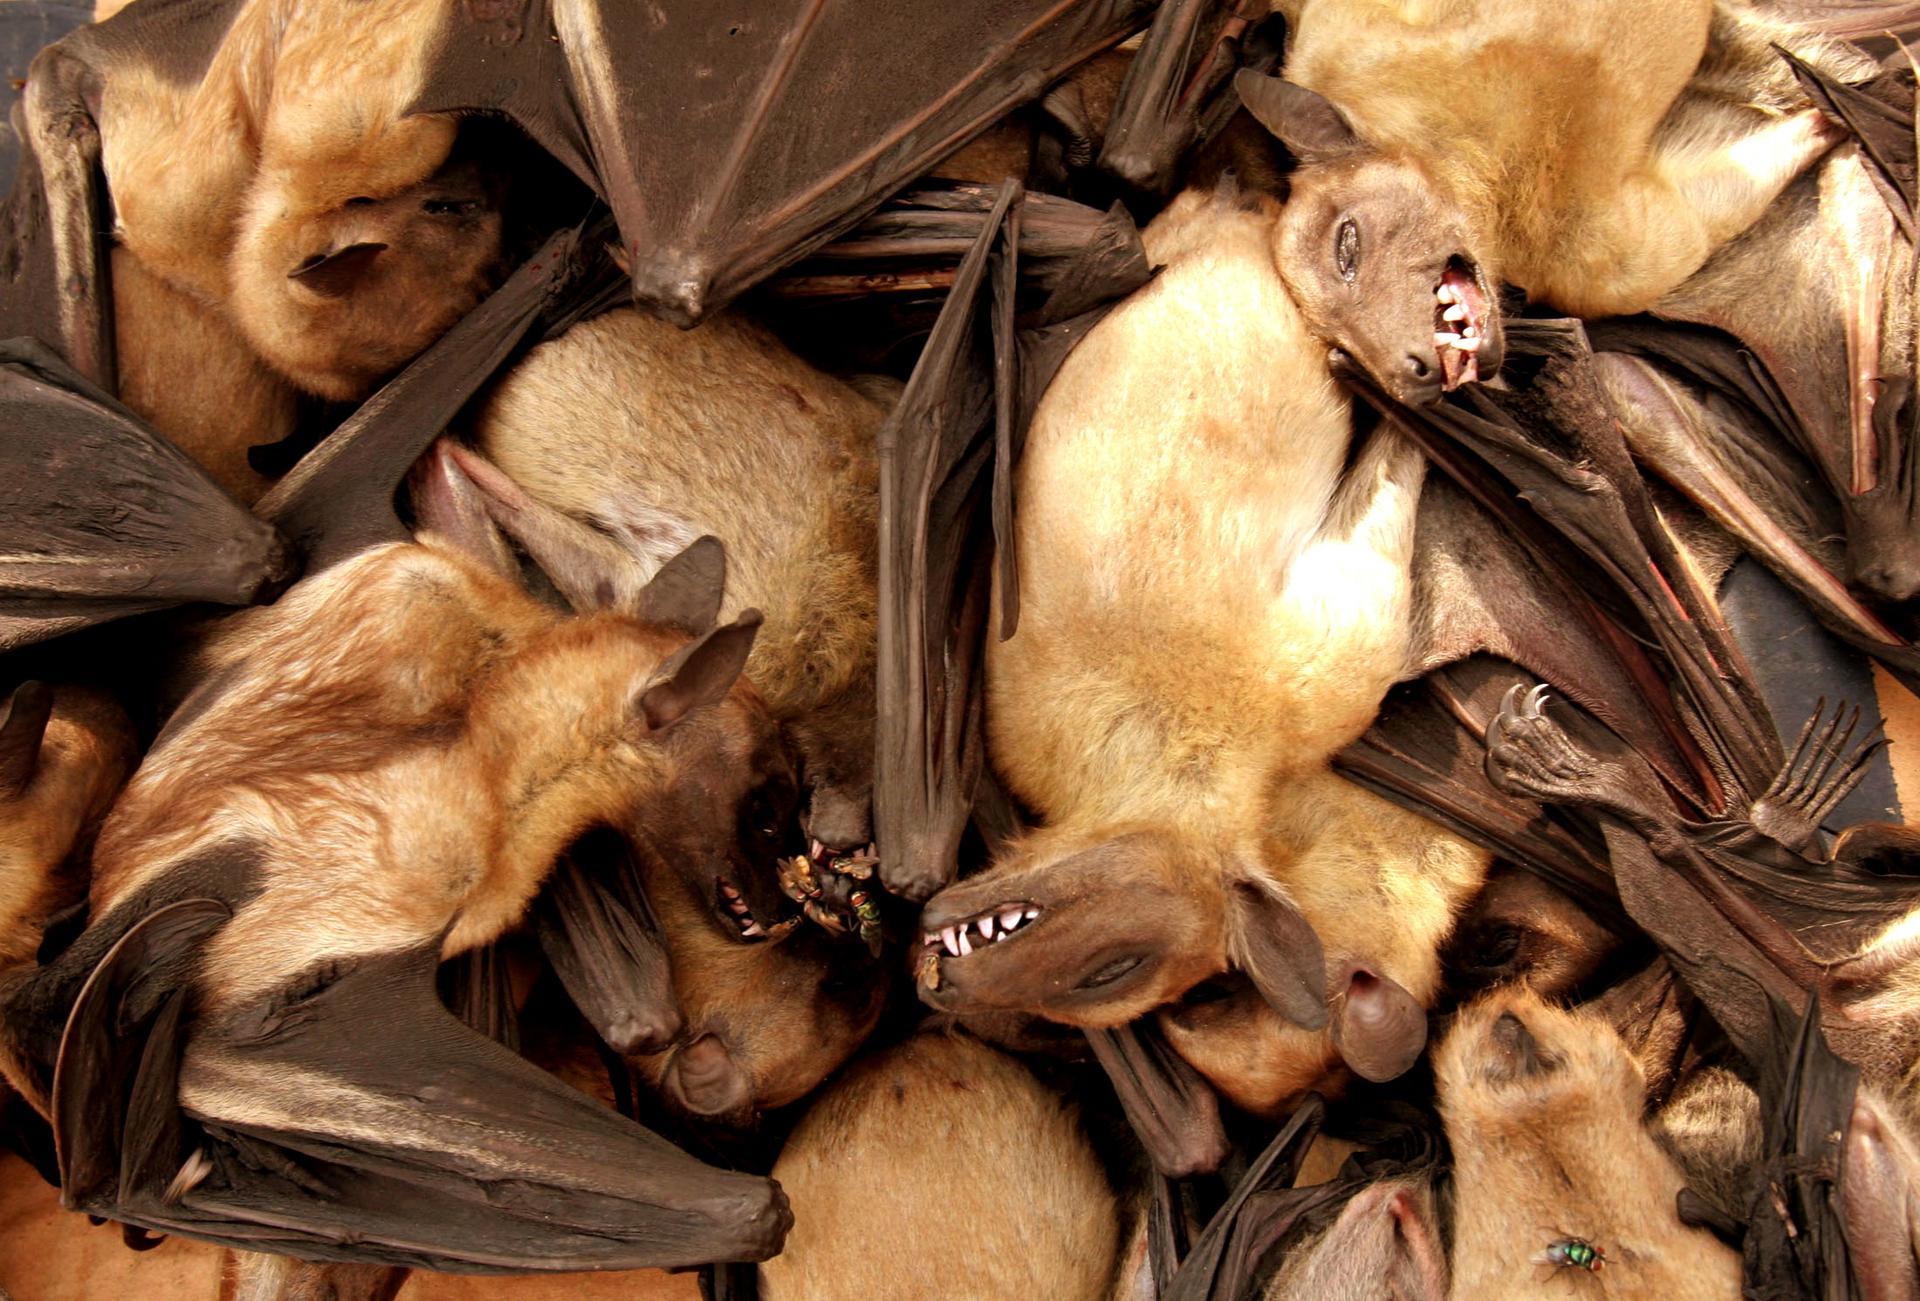 Fruit bats are seen for sale at a food market in Brazzaville, Republic of Congo.